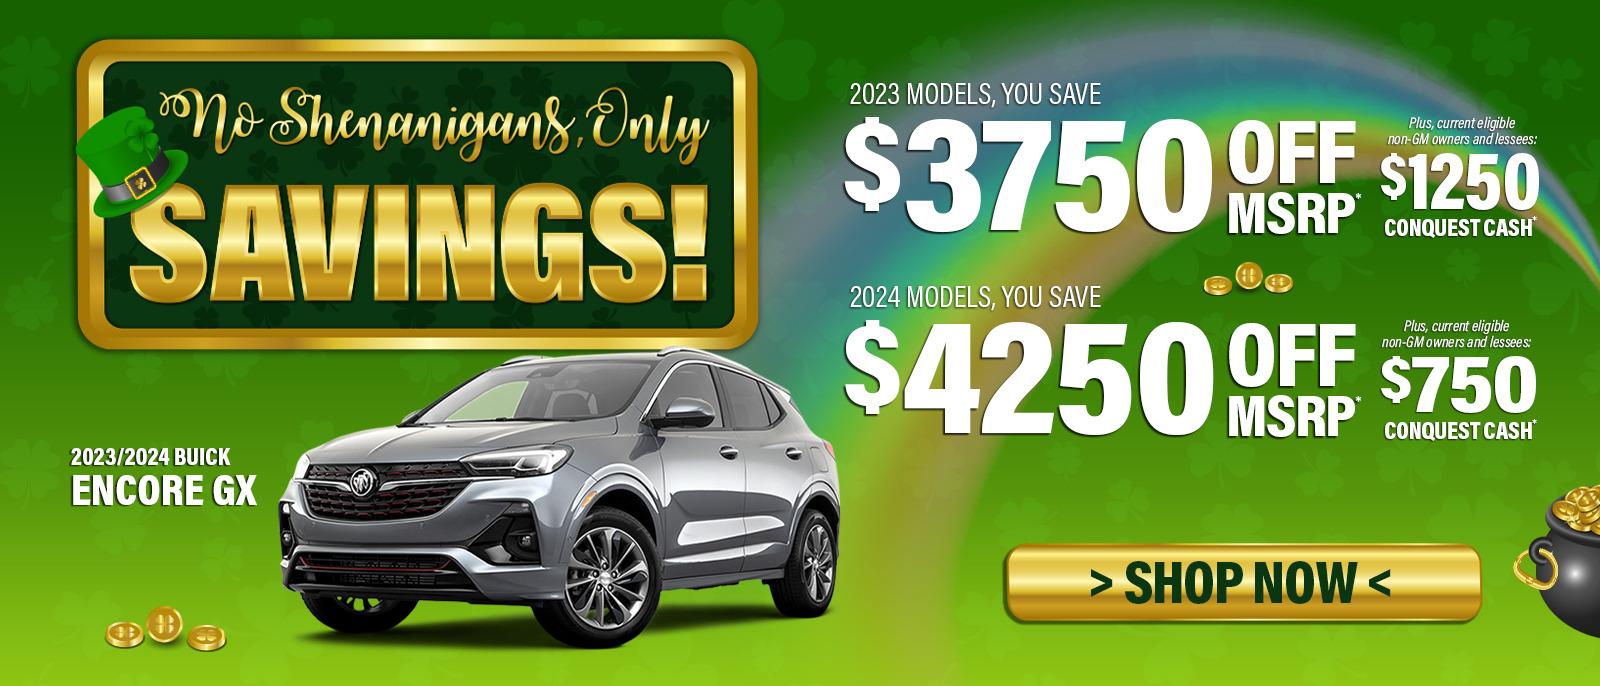 2023/2024 Buick Encore GX - 2023 Models: You save $3750 Off MSRP, current eligible non-GM owners and lessees - $1250 Conquest Cash; 2024 Models: You save $4250 Off MSRP, current eligible non-GM owners and lessees - $750 Conquest Cash